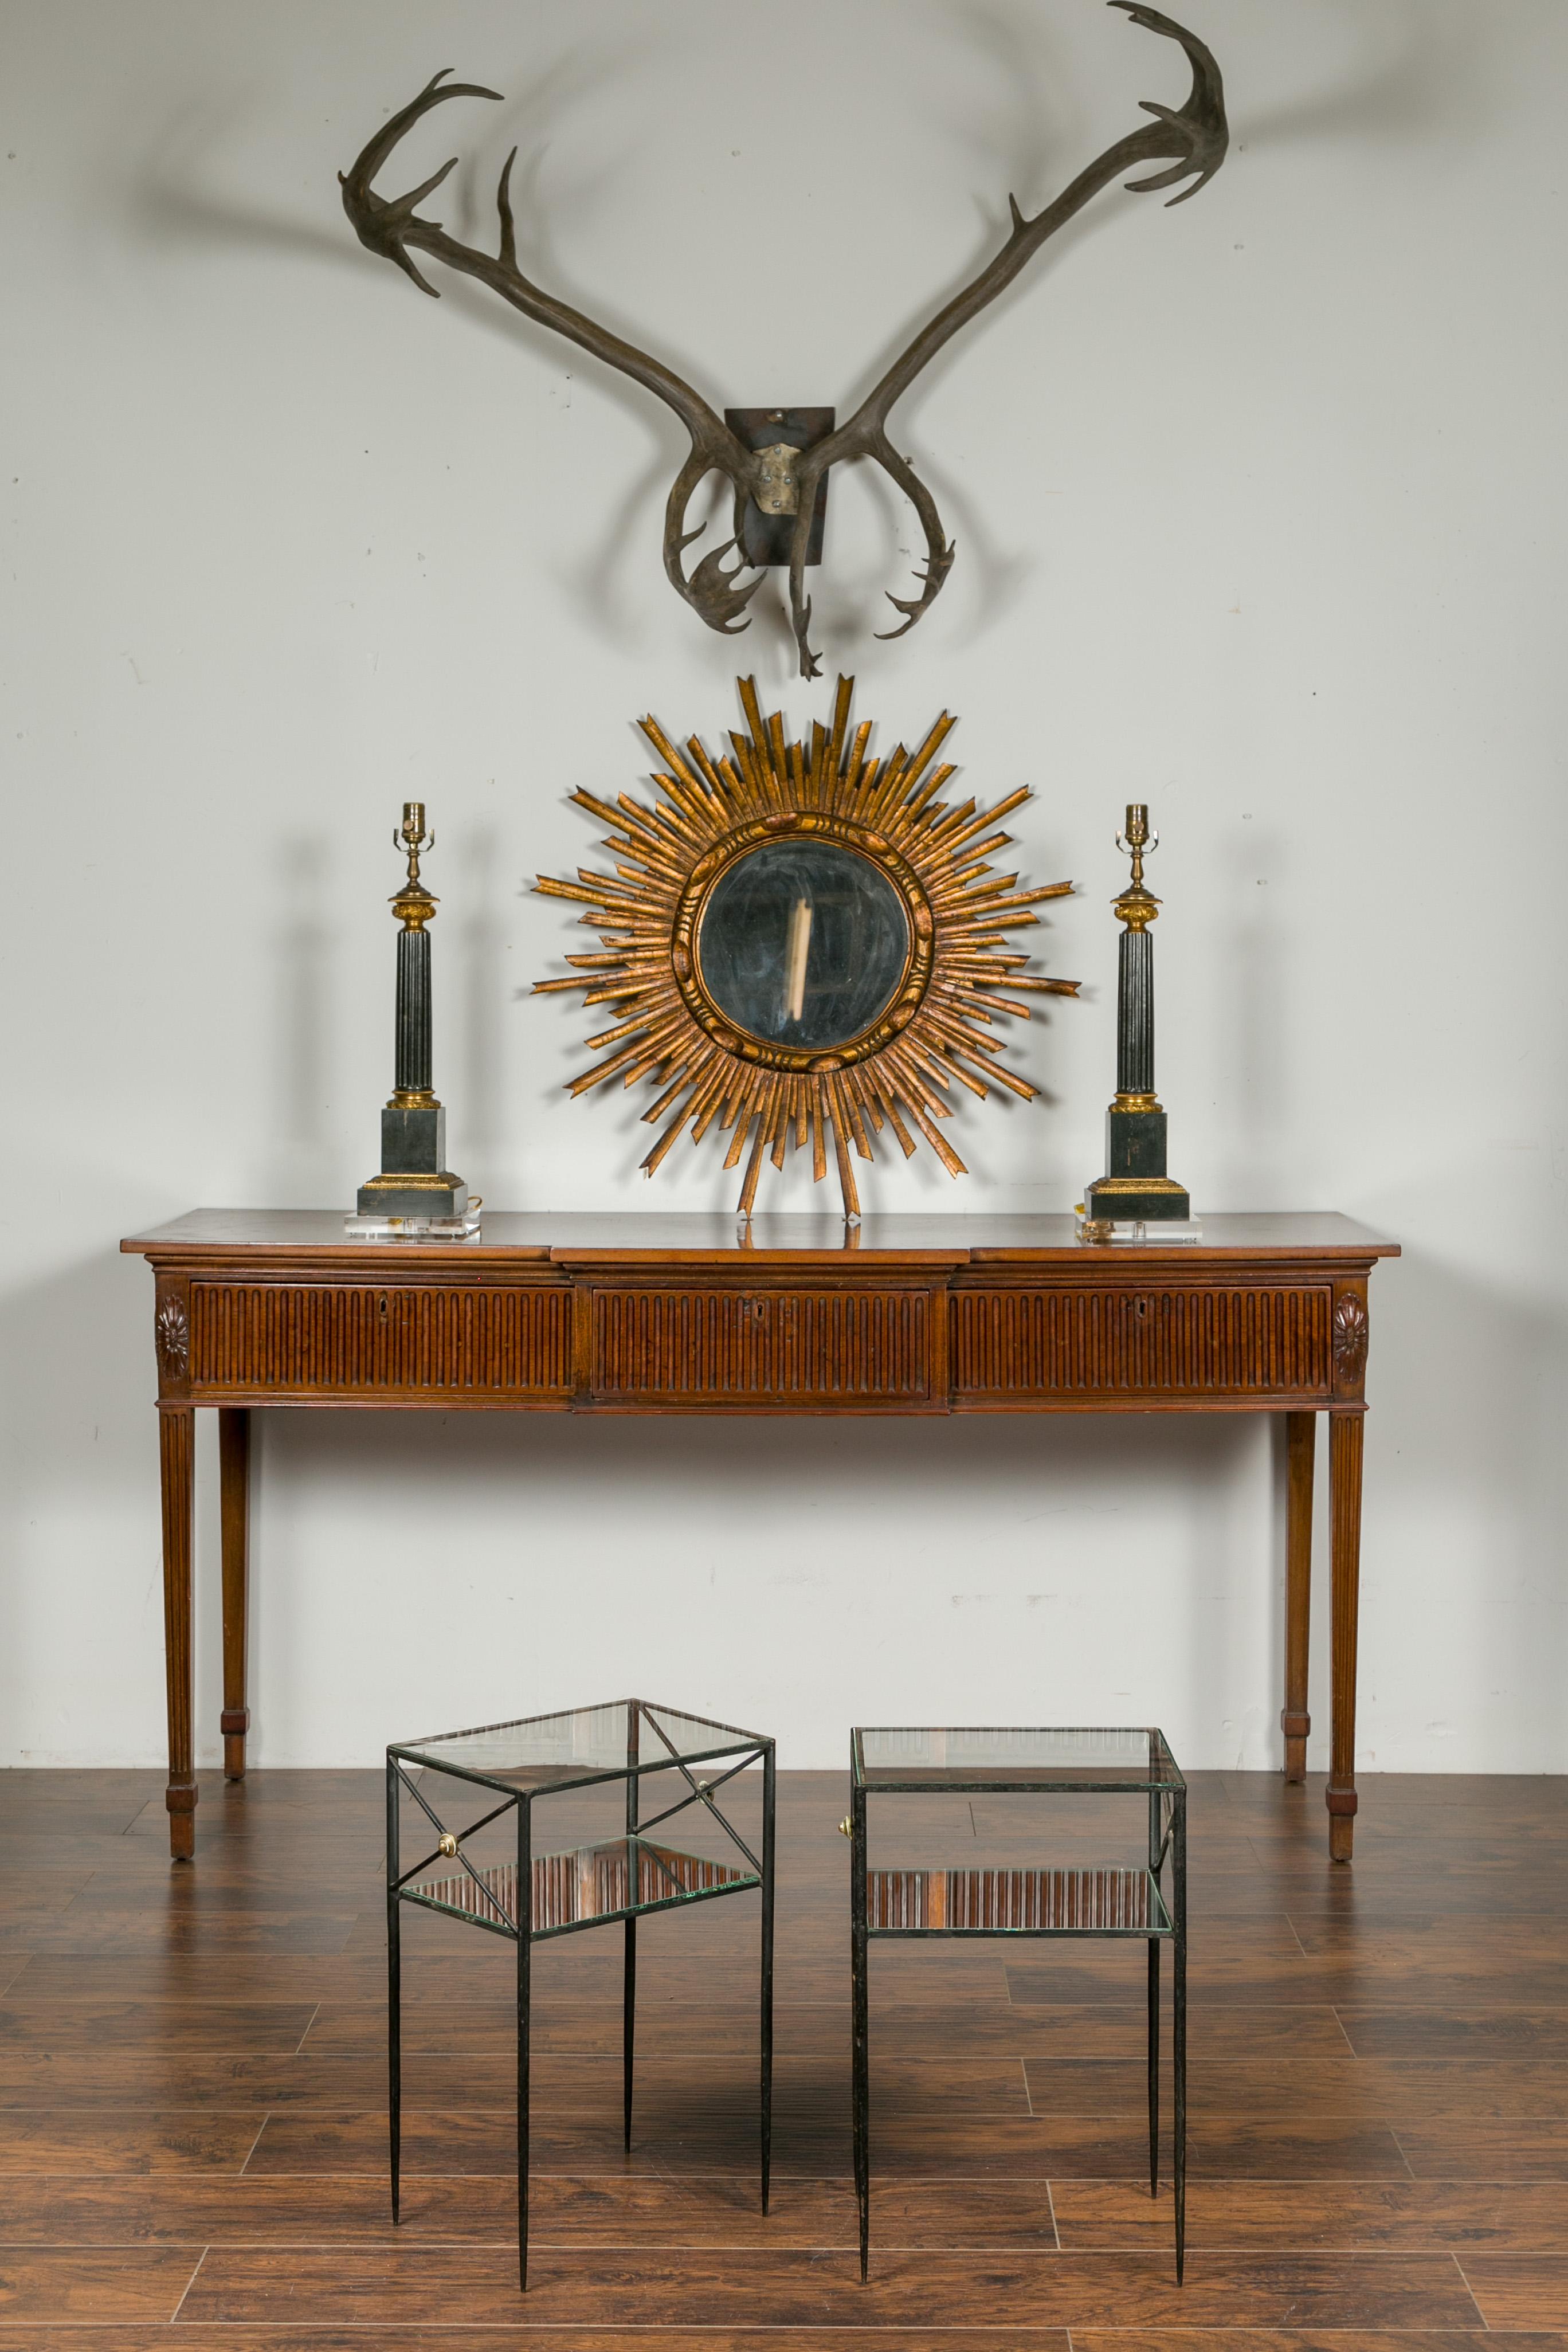 A pair of French vintage iron side tables from the mid-20th century, with brass accents, glass tops and mirrored shelves. Born in France during the midcentury period, each of this pair of drinks tables features an iron structure securing a glass top